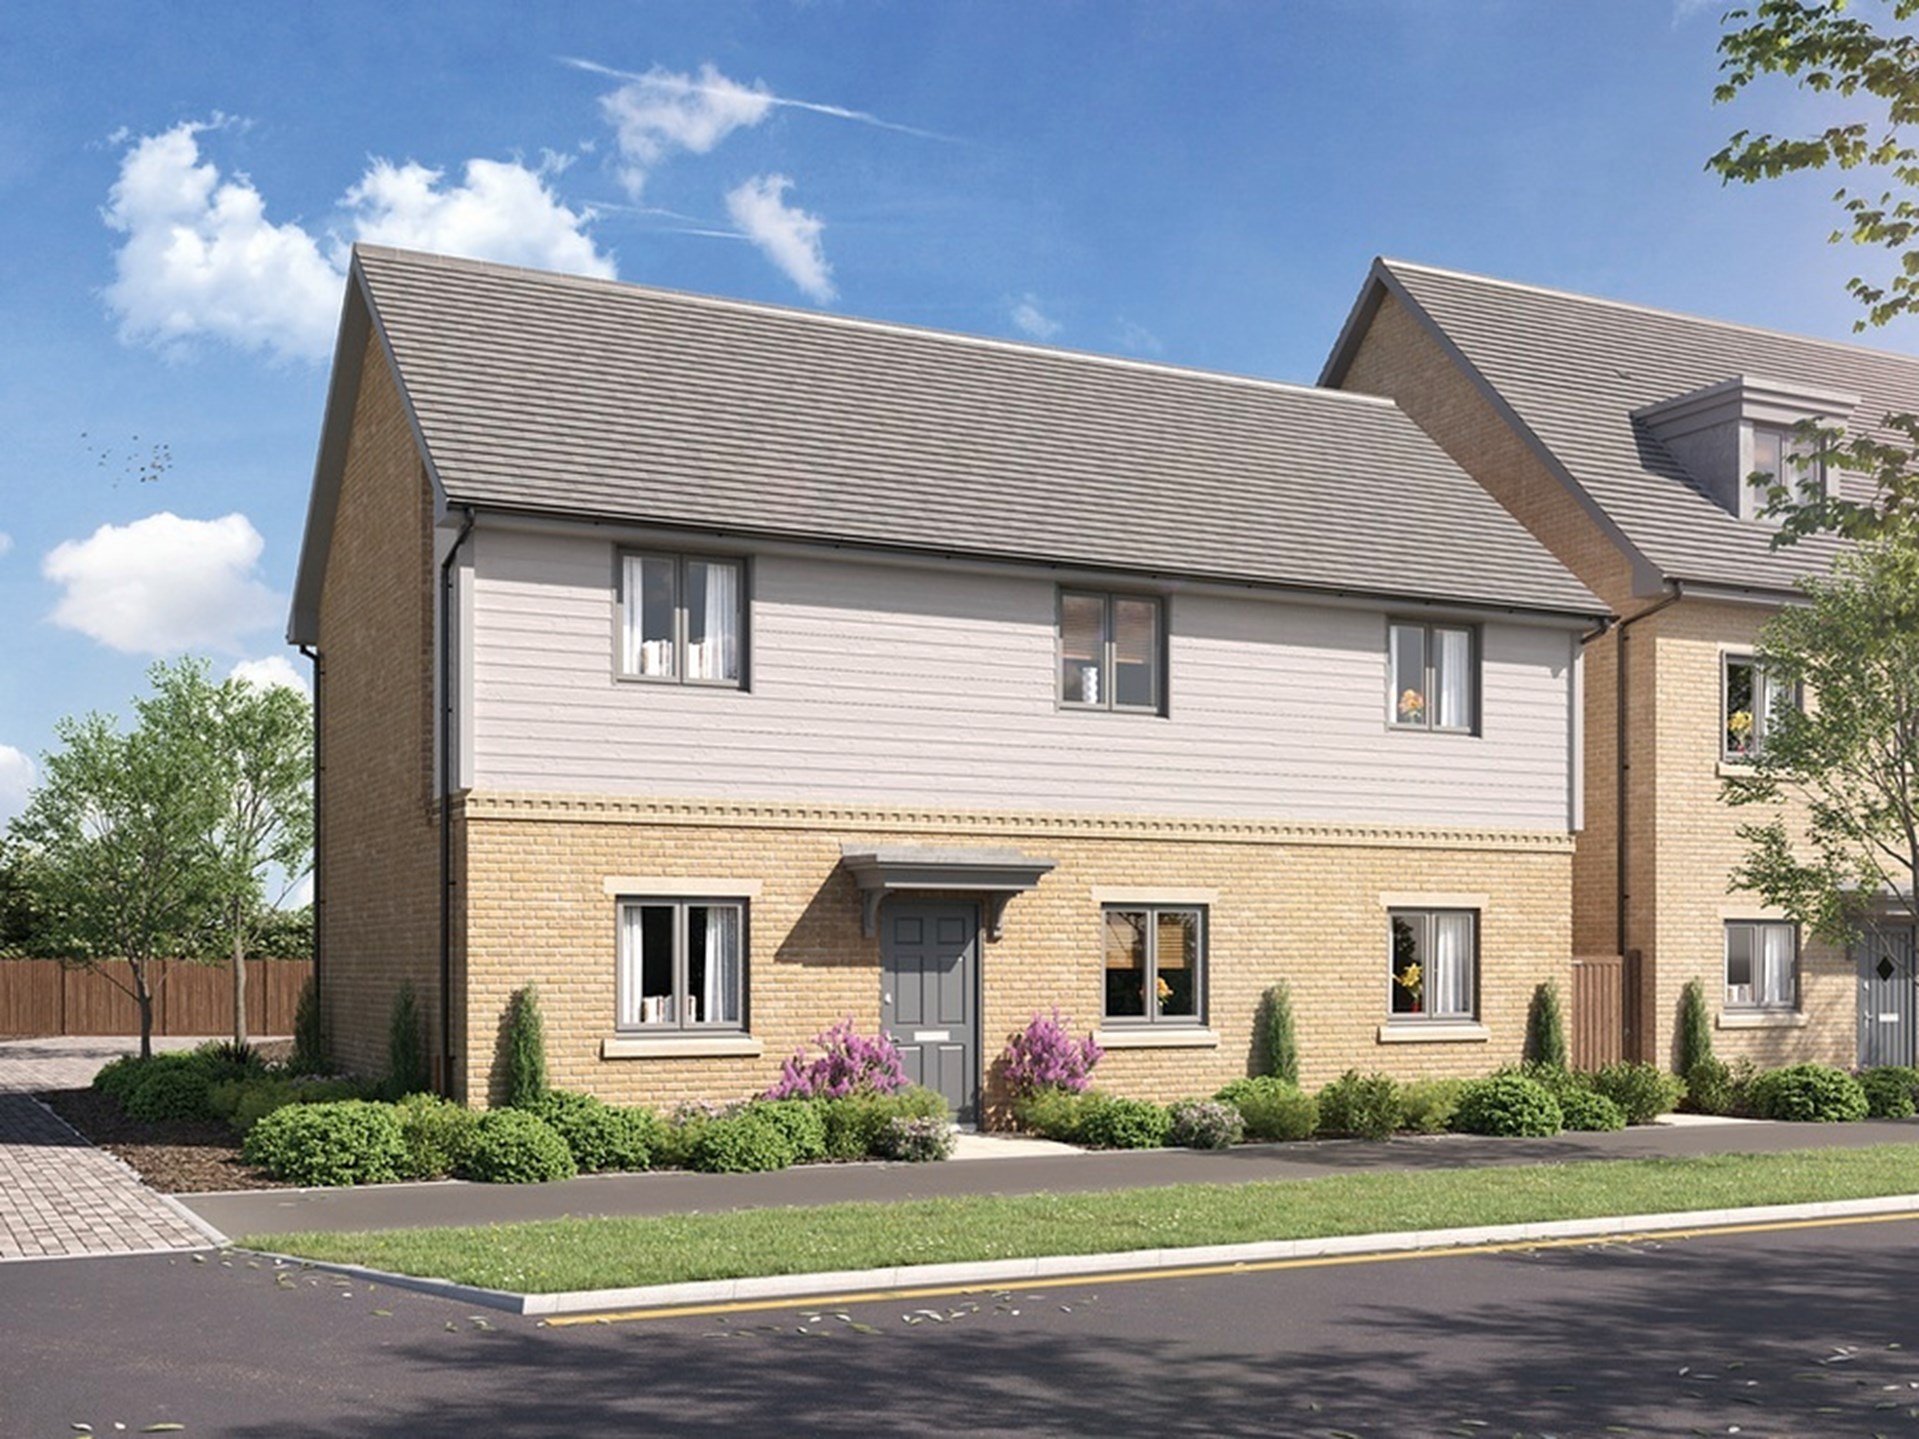 Property 1 of 10. Nobel Park Phase 4, Didcot